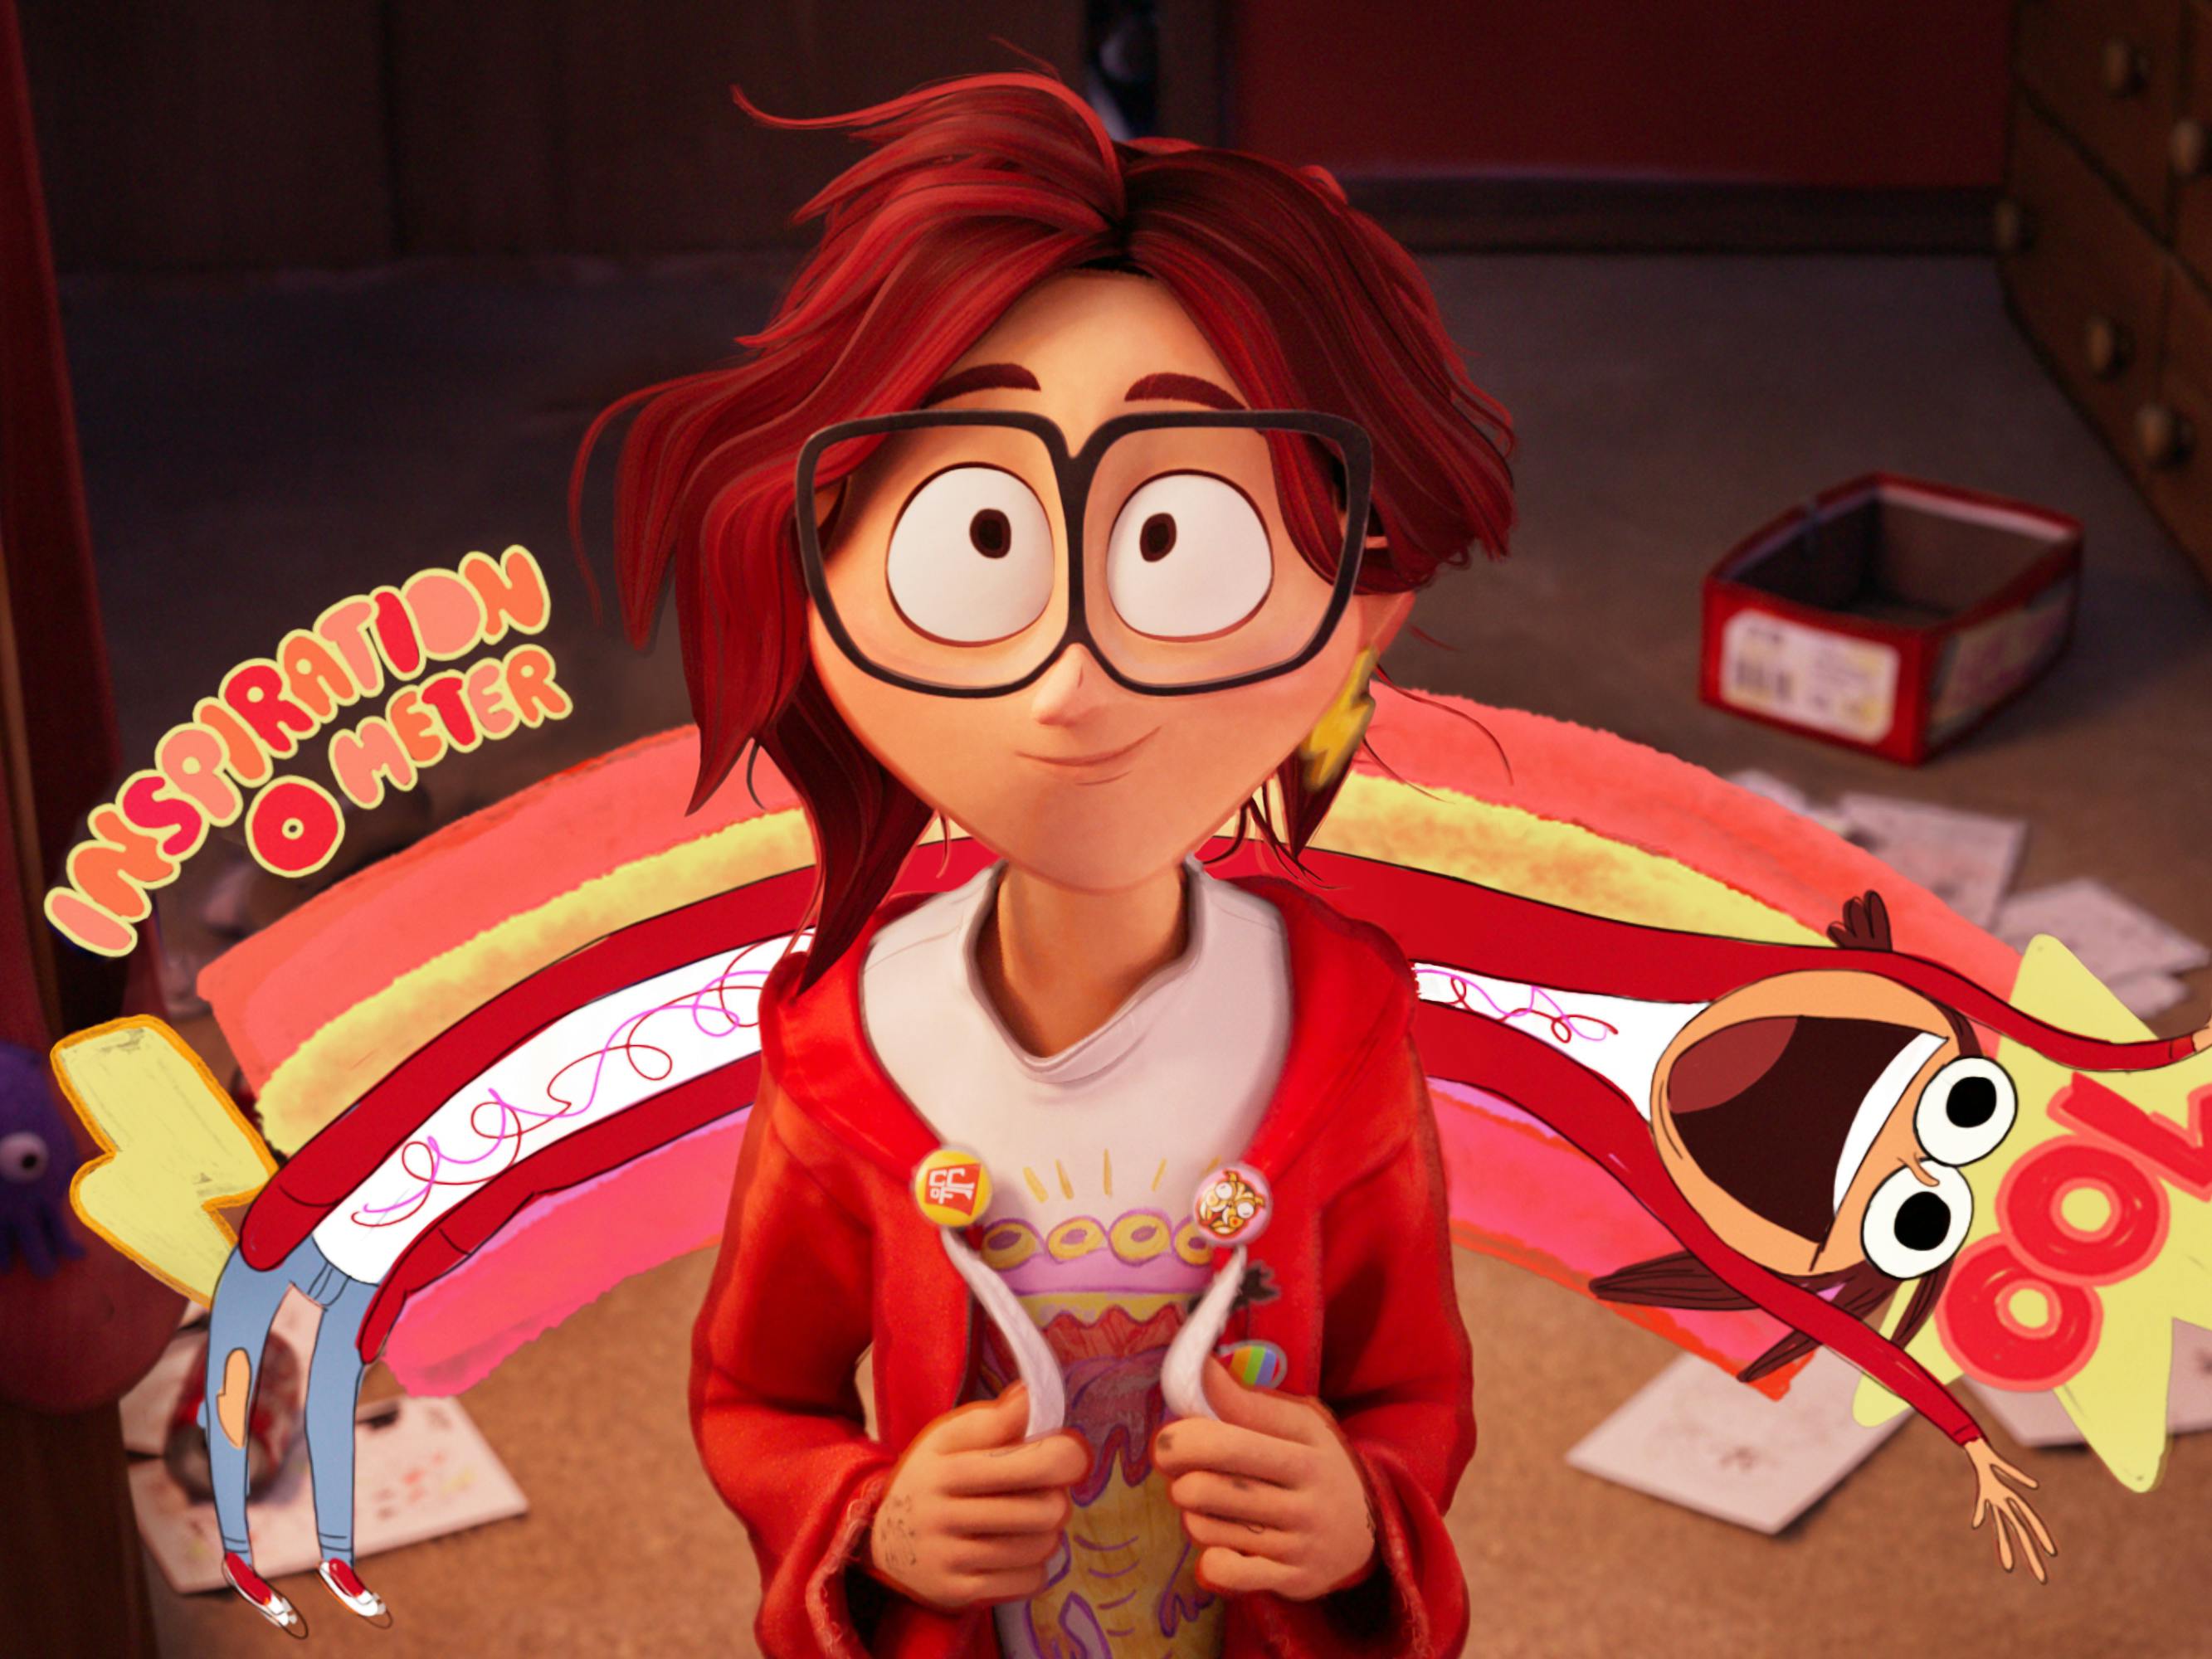 Katie Mitchell wears a red hoodie, big glasses, and a white t-shirt. Behind her is elongated hotdog that reads "Inspiration O Meter."